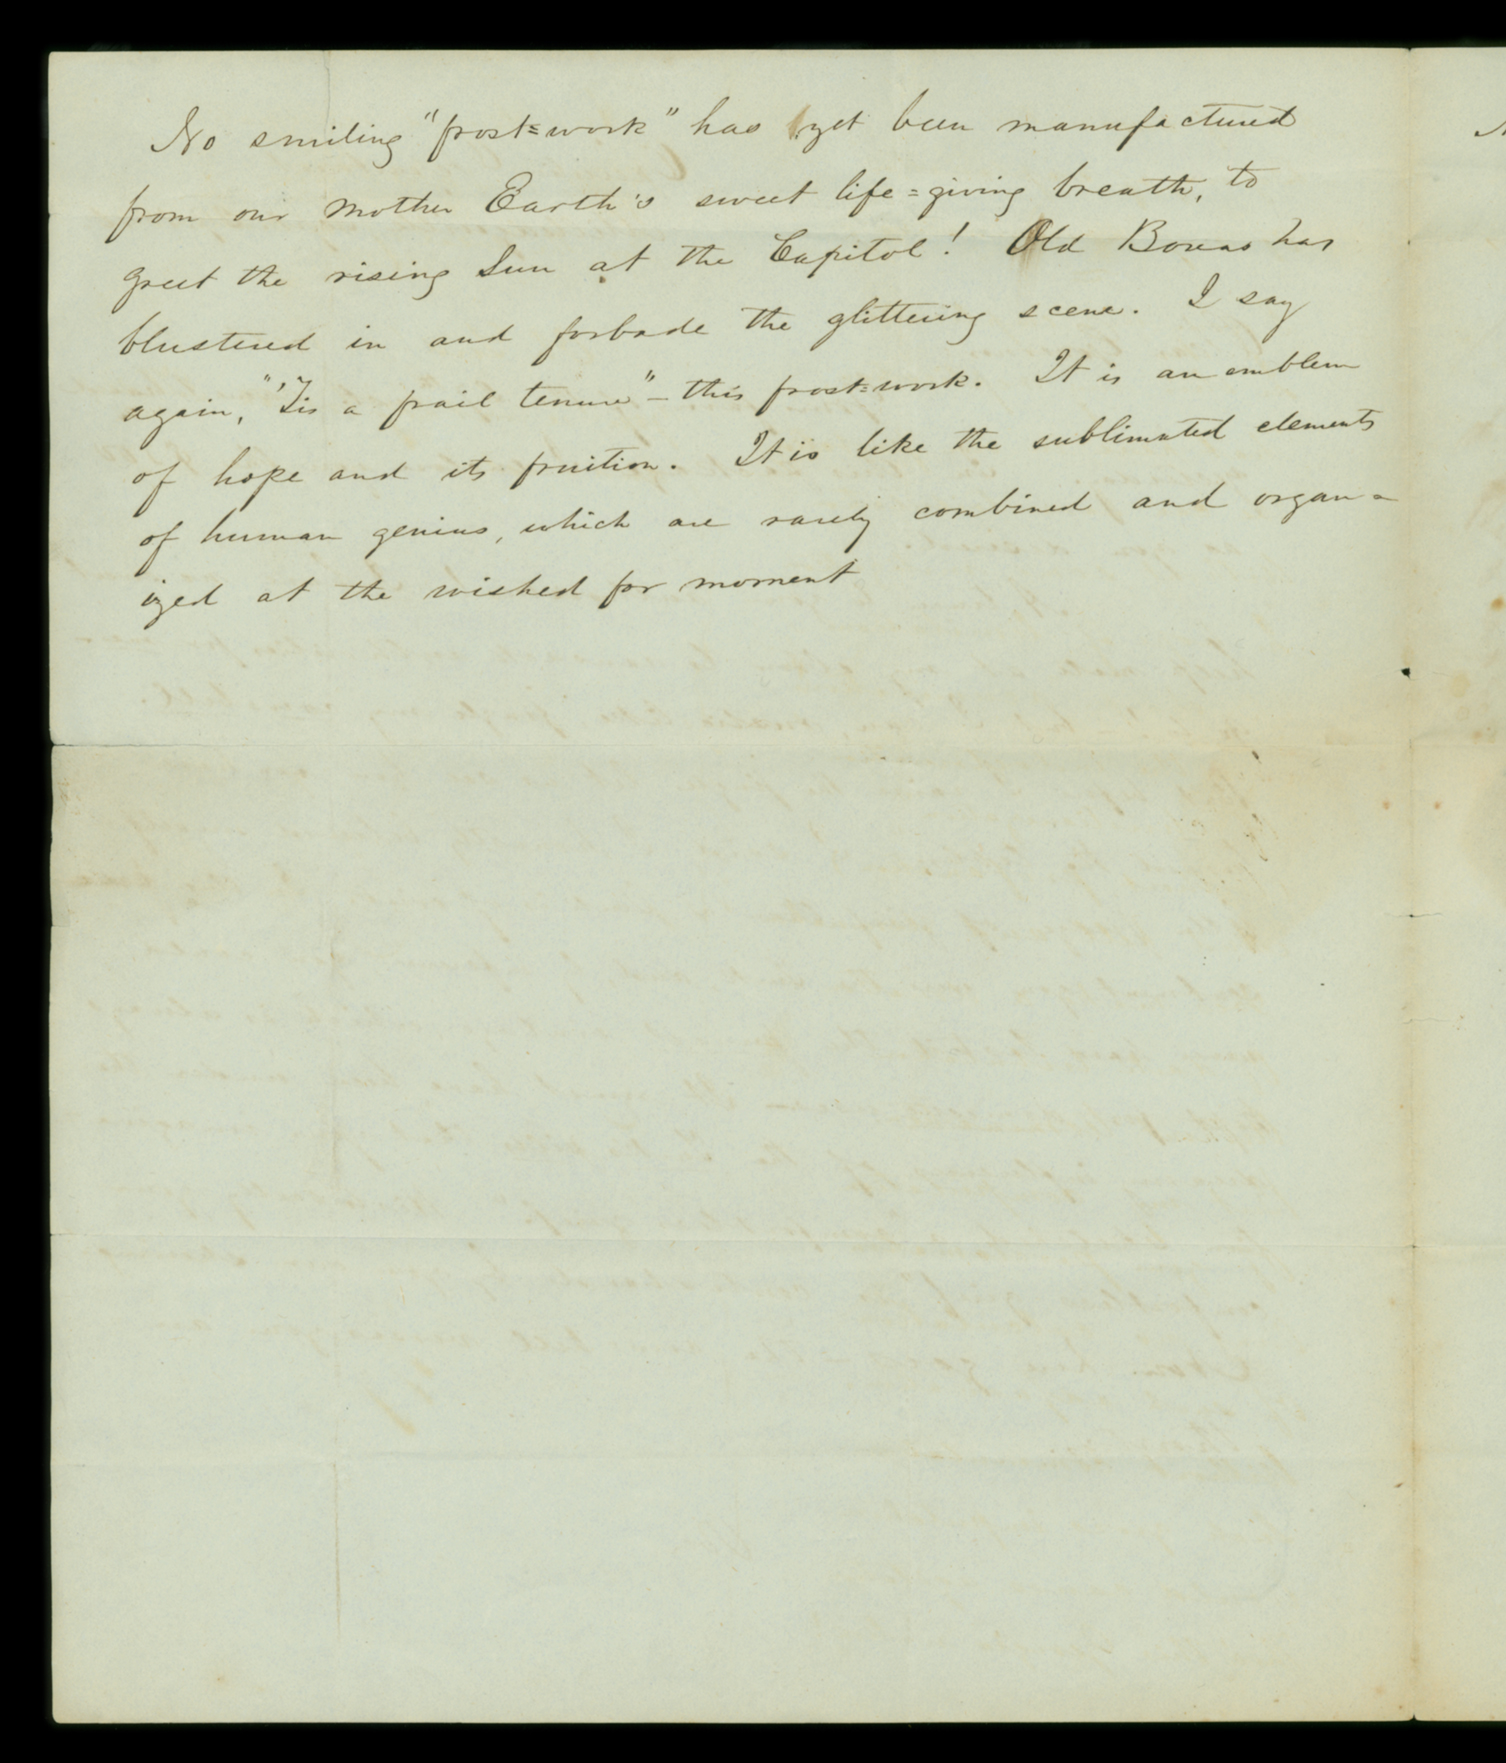 Letter, L. J. Anderson, Milledgeville, Georgia, to His Excellency Geo[rge] W. Crawford, Belair, Georgia, Page 2